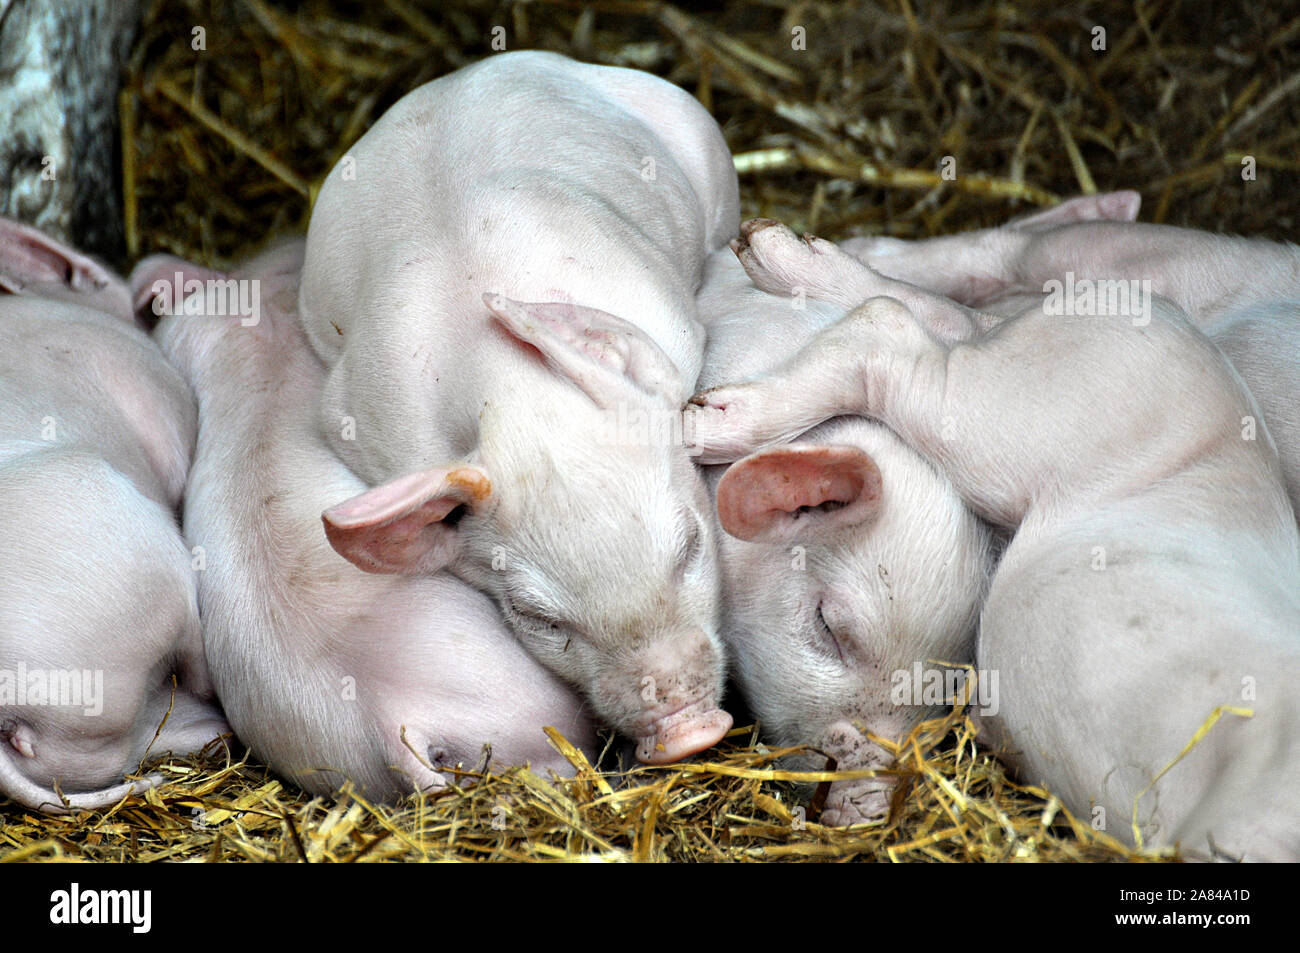 A litter of very cute baby piglets sleeping hay huddled on top of each other trying to keep warm - Wales UK Farm Stock Photo